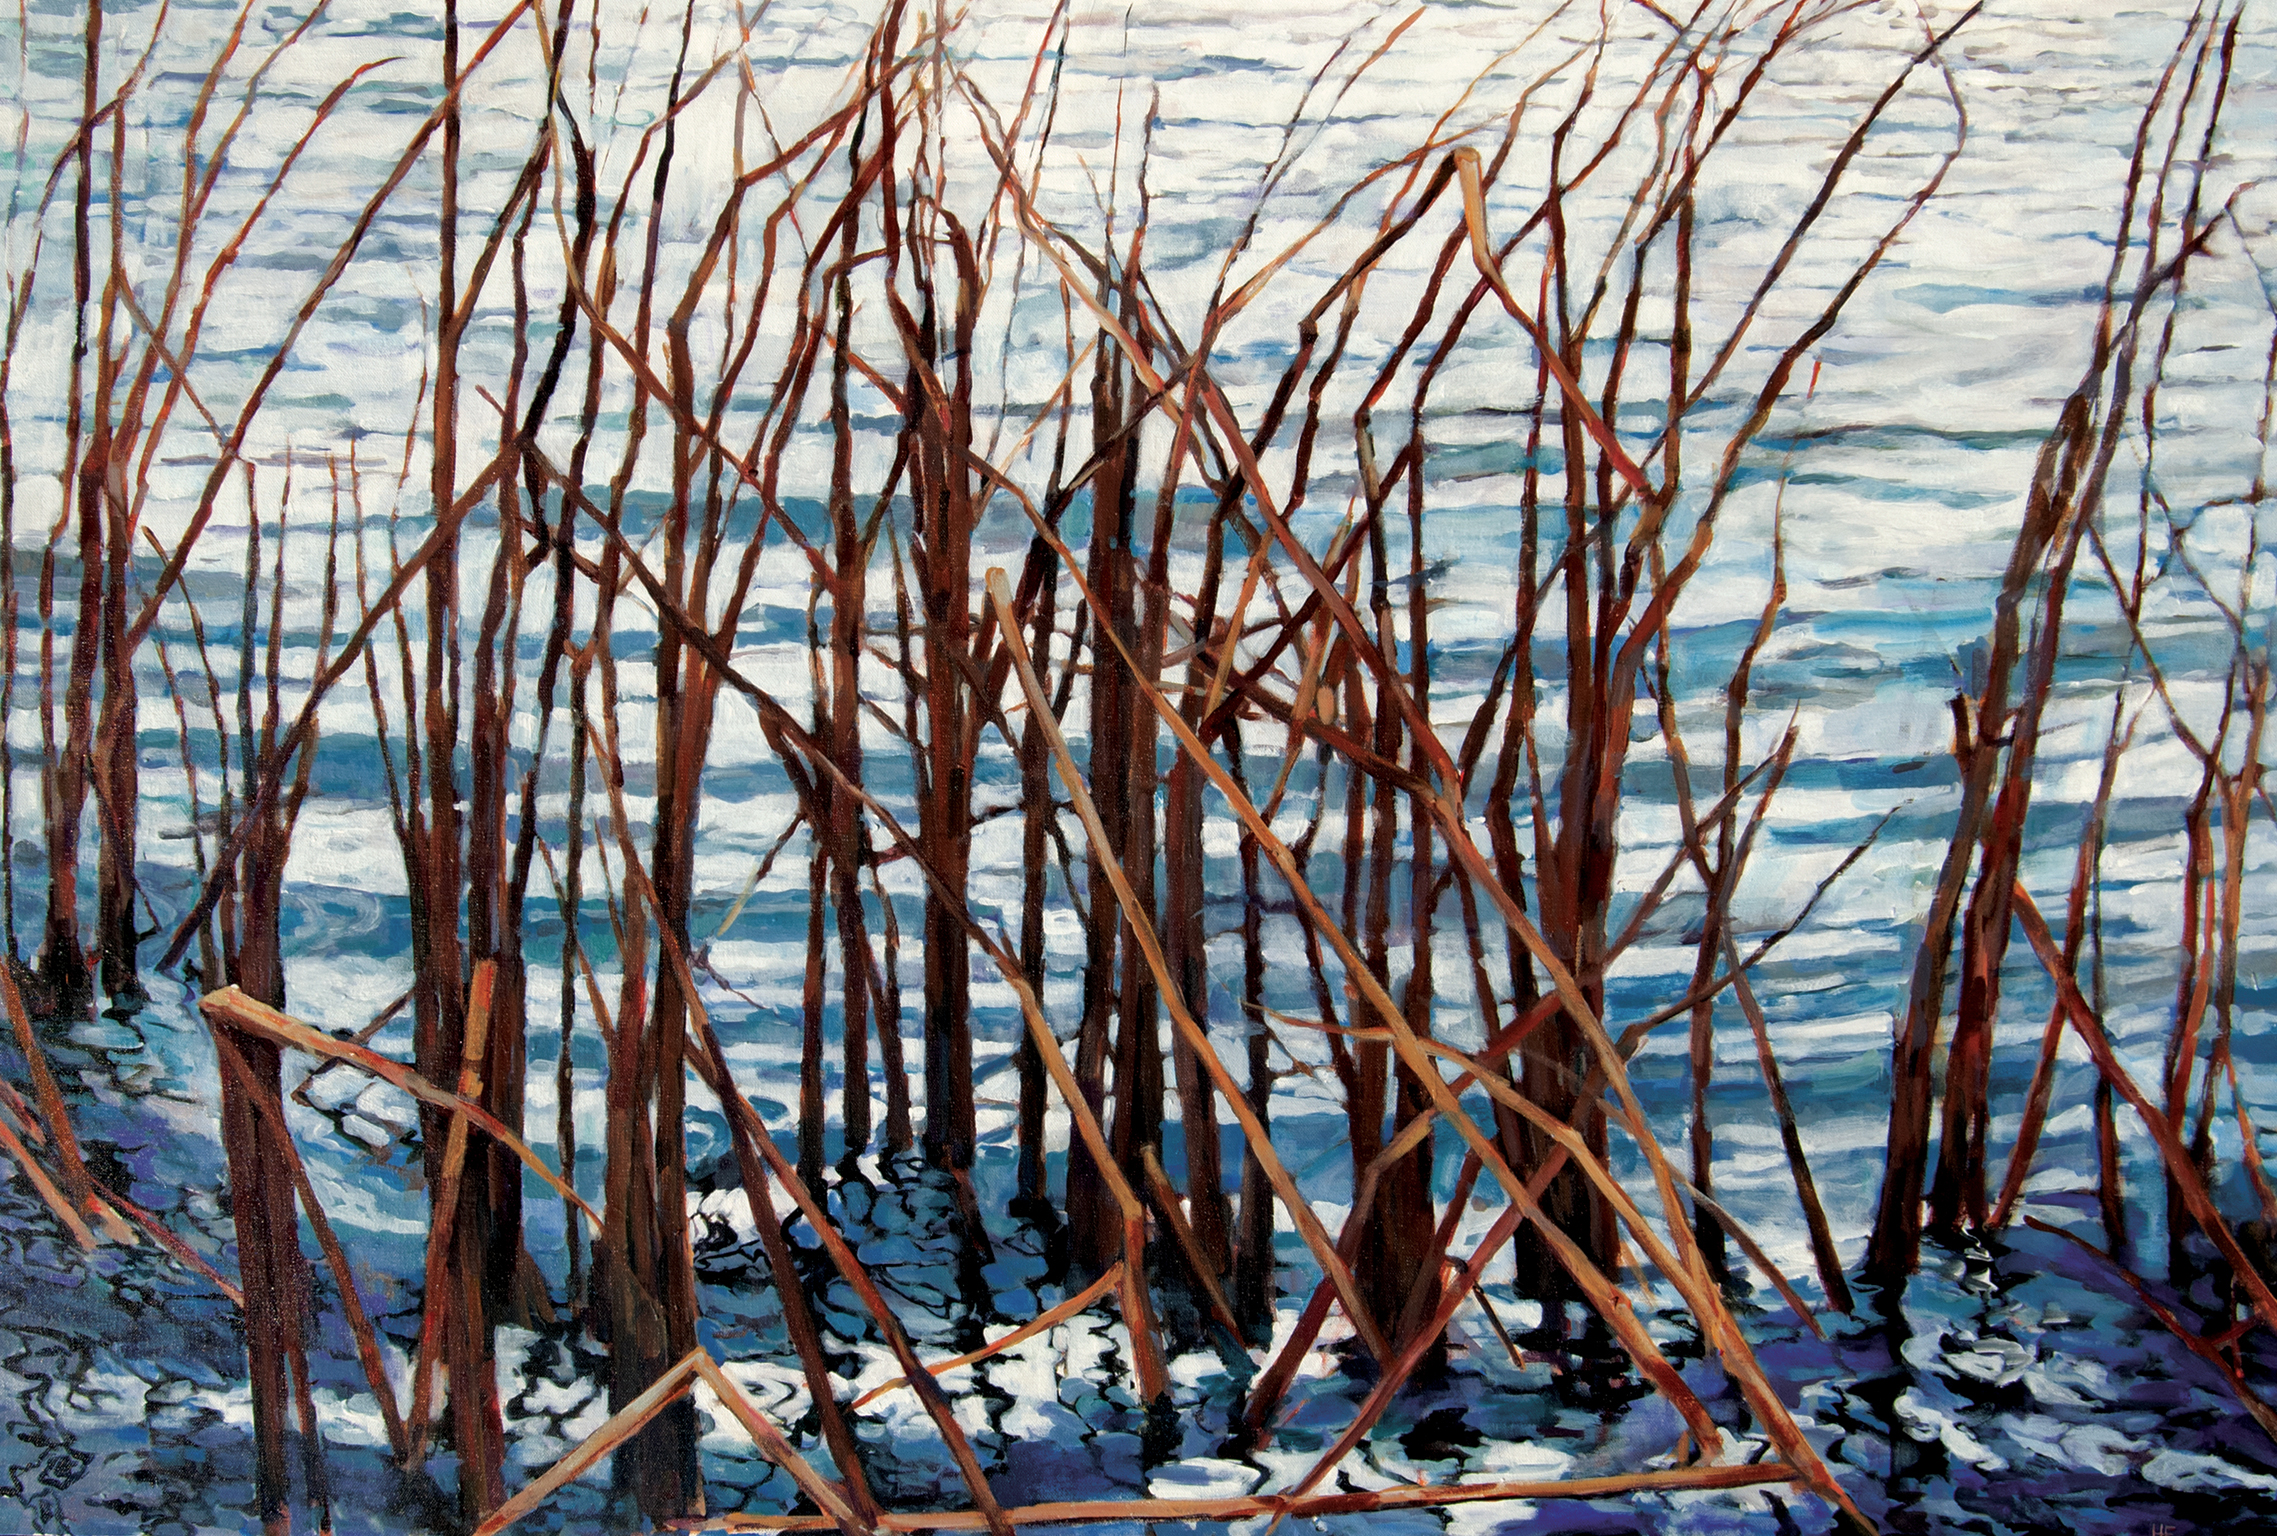 Heather Foster - Reeds and Ripples